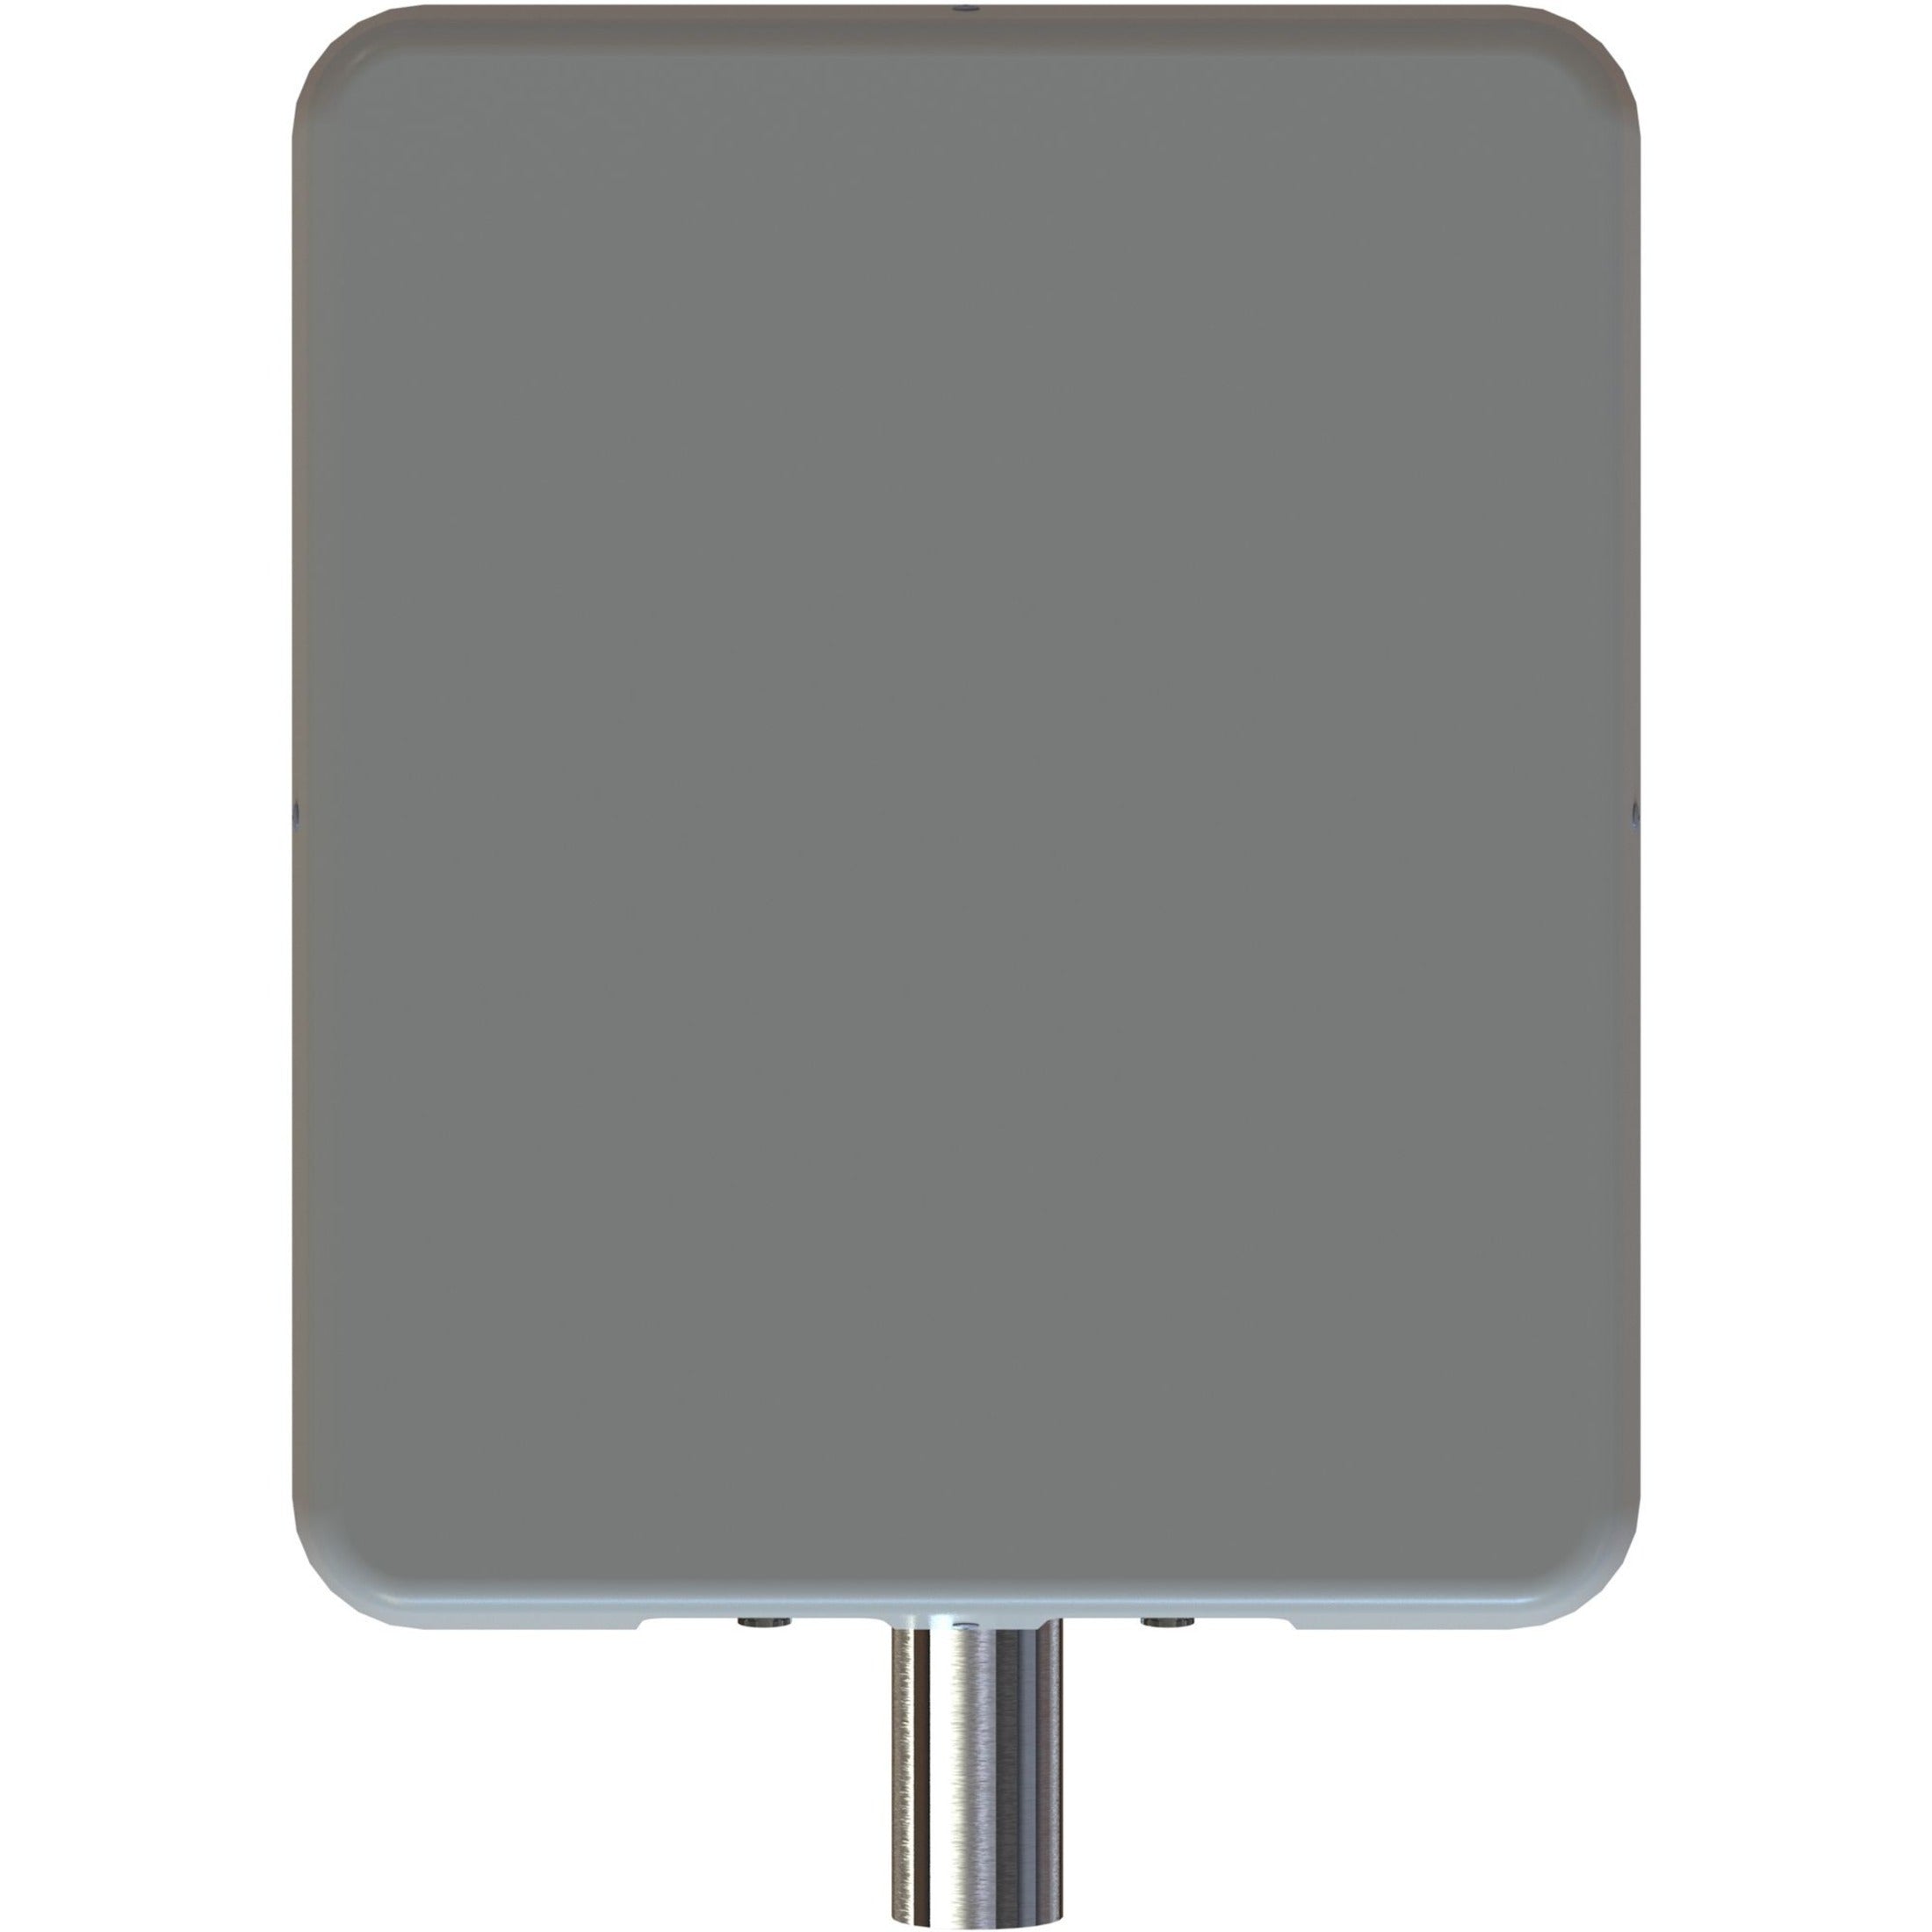 Parsec PTAGD2L50 Great Dane Series - Roof Mount Omnidirectional Antenna, Cellular Network, N-Type Connector